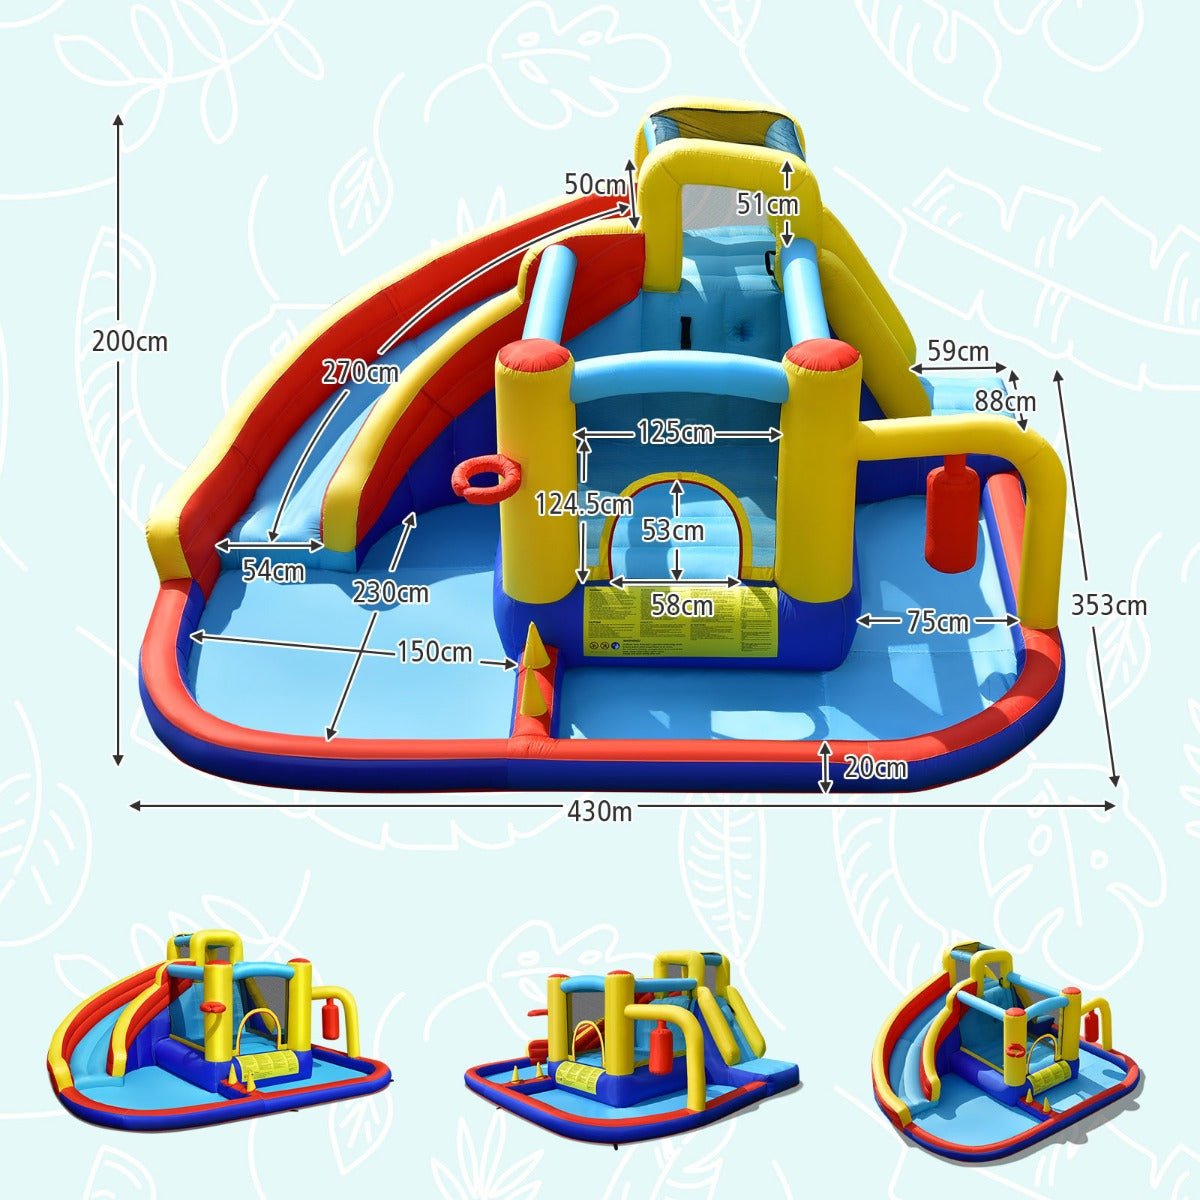 7-in-1 Bounce Castle: The Ultimate Adventure Playground!